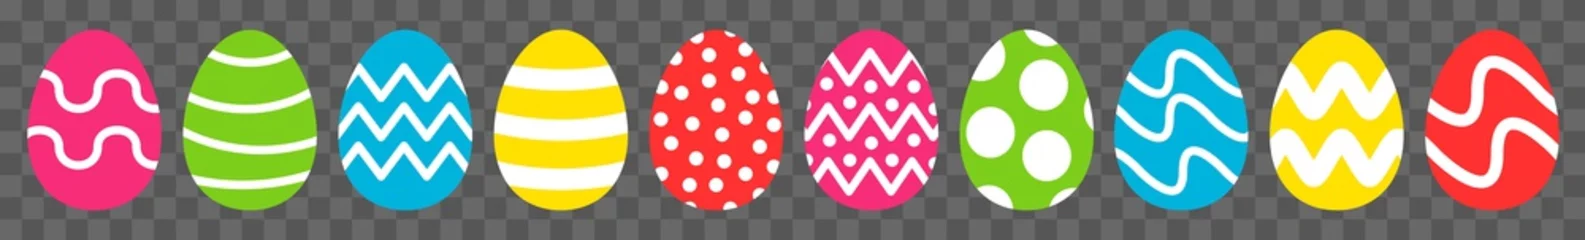 Stof per meter Easter Egg Icon Color   Painted Eggs Illustration   Happy Easter Hunt Symbol   Holiday Logo   April Spring Sign   Isolated   Variations © endstern